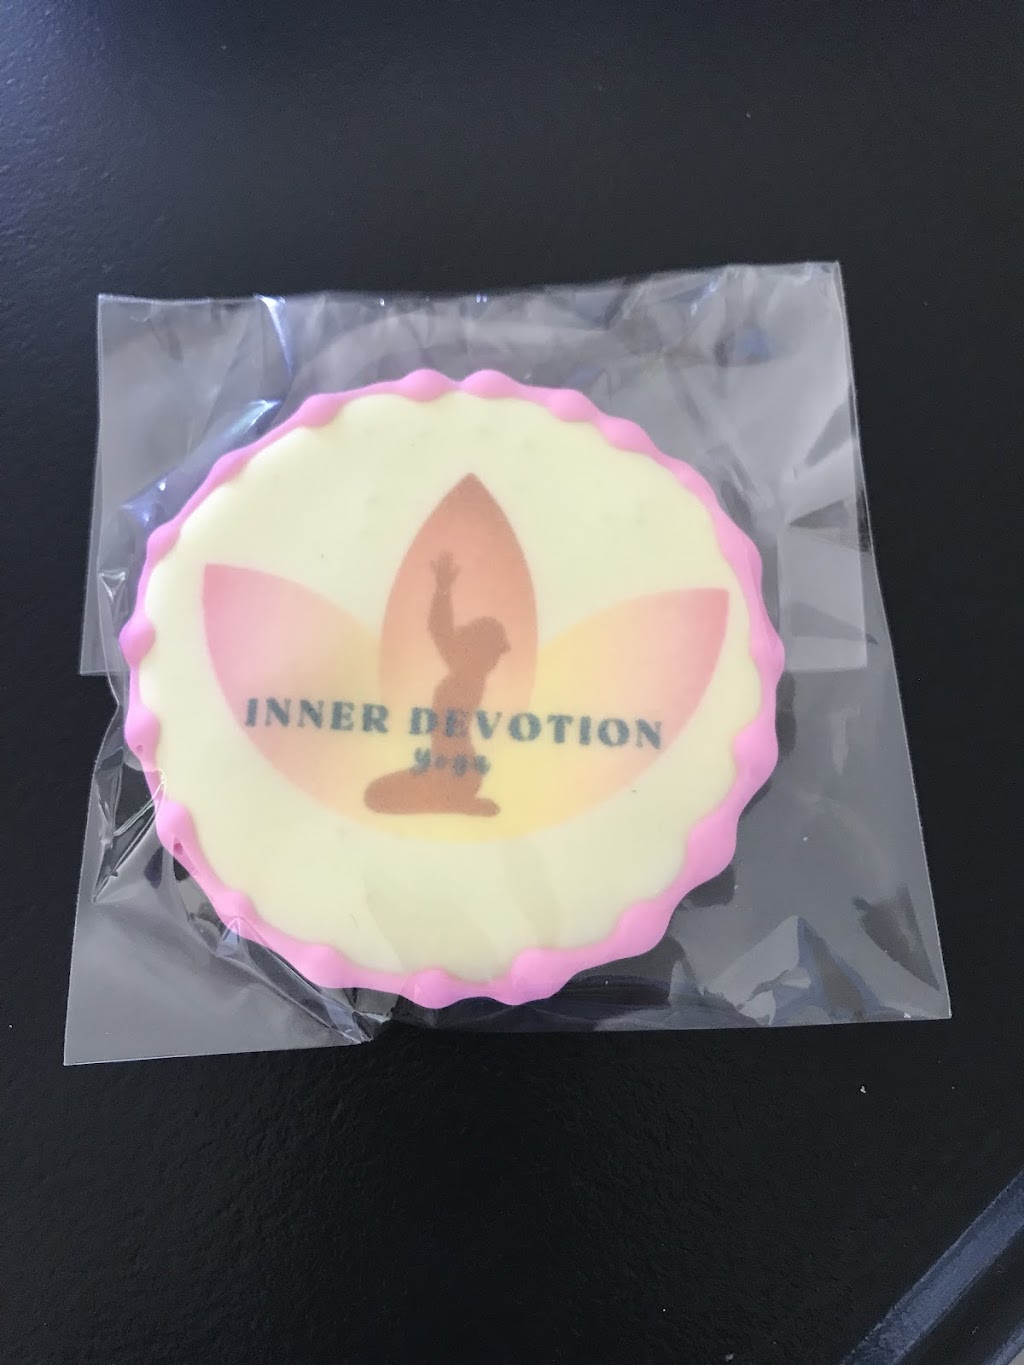 Inner Devotion Yoga | Lakefield Arena - Upper Floor, 20 Concession St, Lakefield, ON K0L 2H0, Canada | Phone: (289) 355-9078